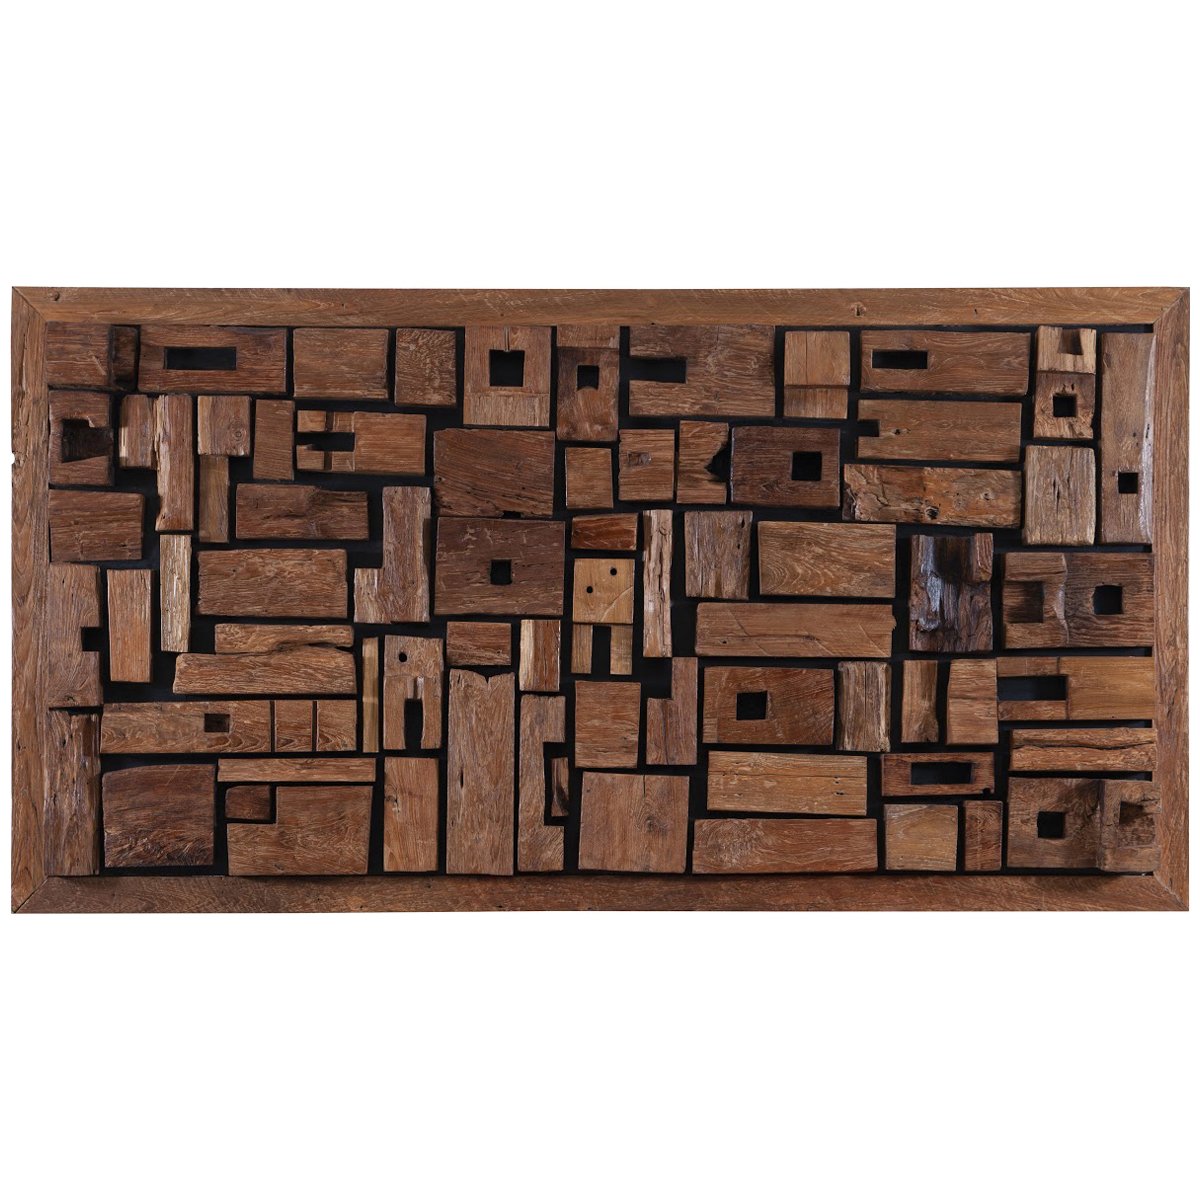 Phillips Collection Asken Wood Wall Art, Large